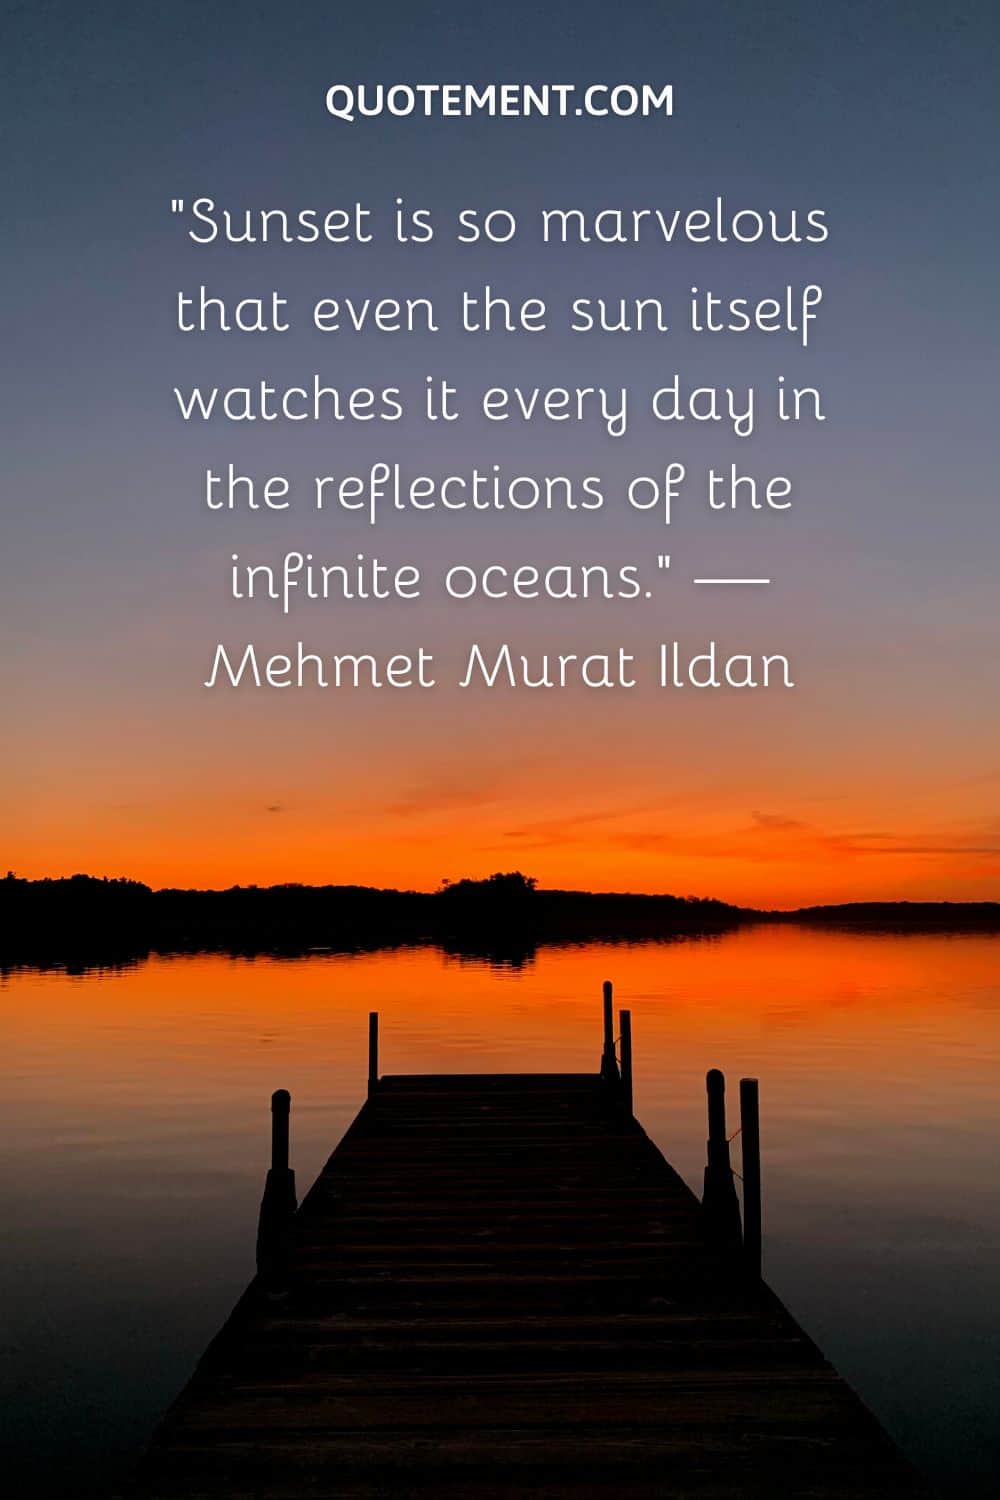 “Sunset is so marvelous that even the sun itself watches it every day in the reflections of the infinite oceans.” — Mehmet Murat Ildan